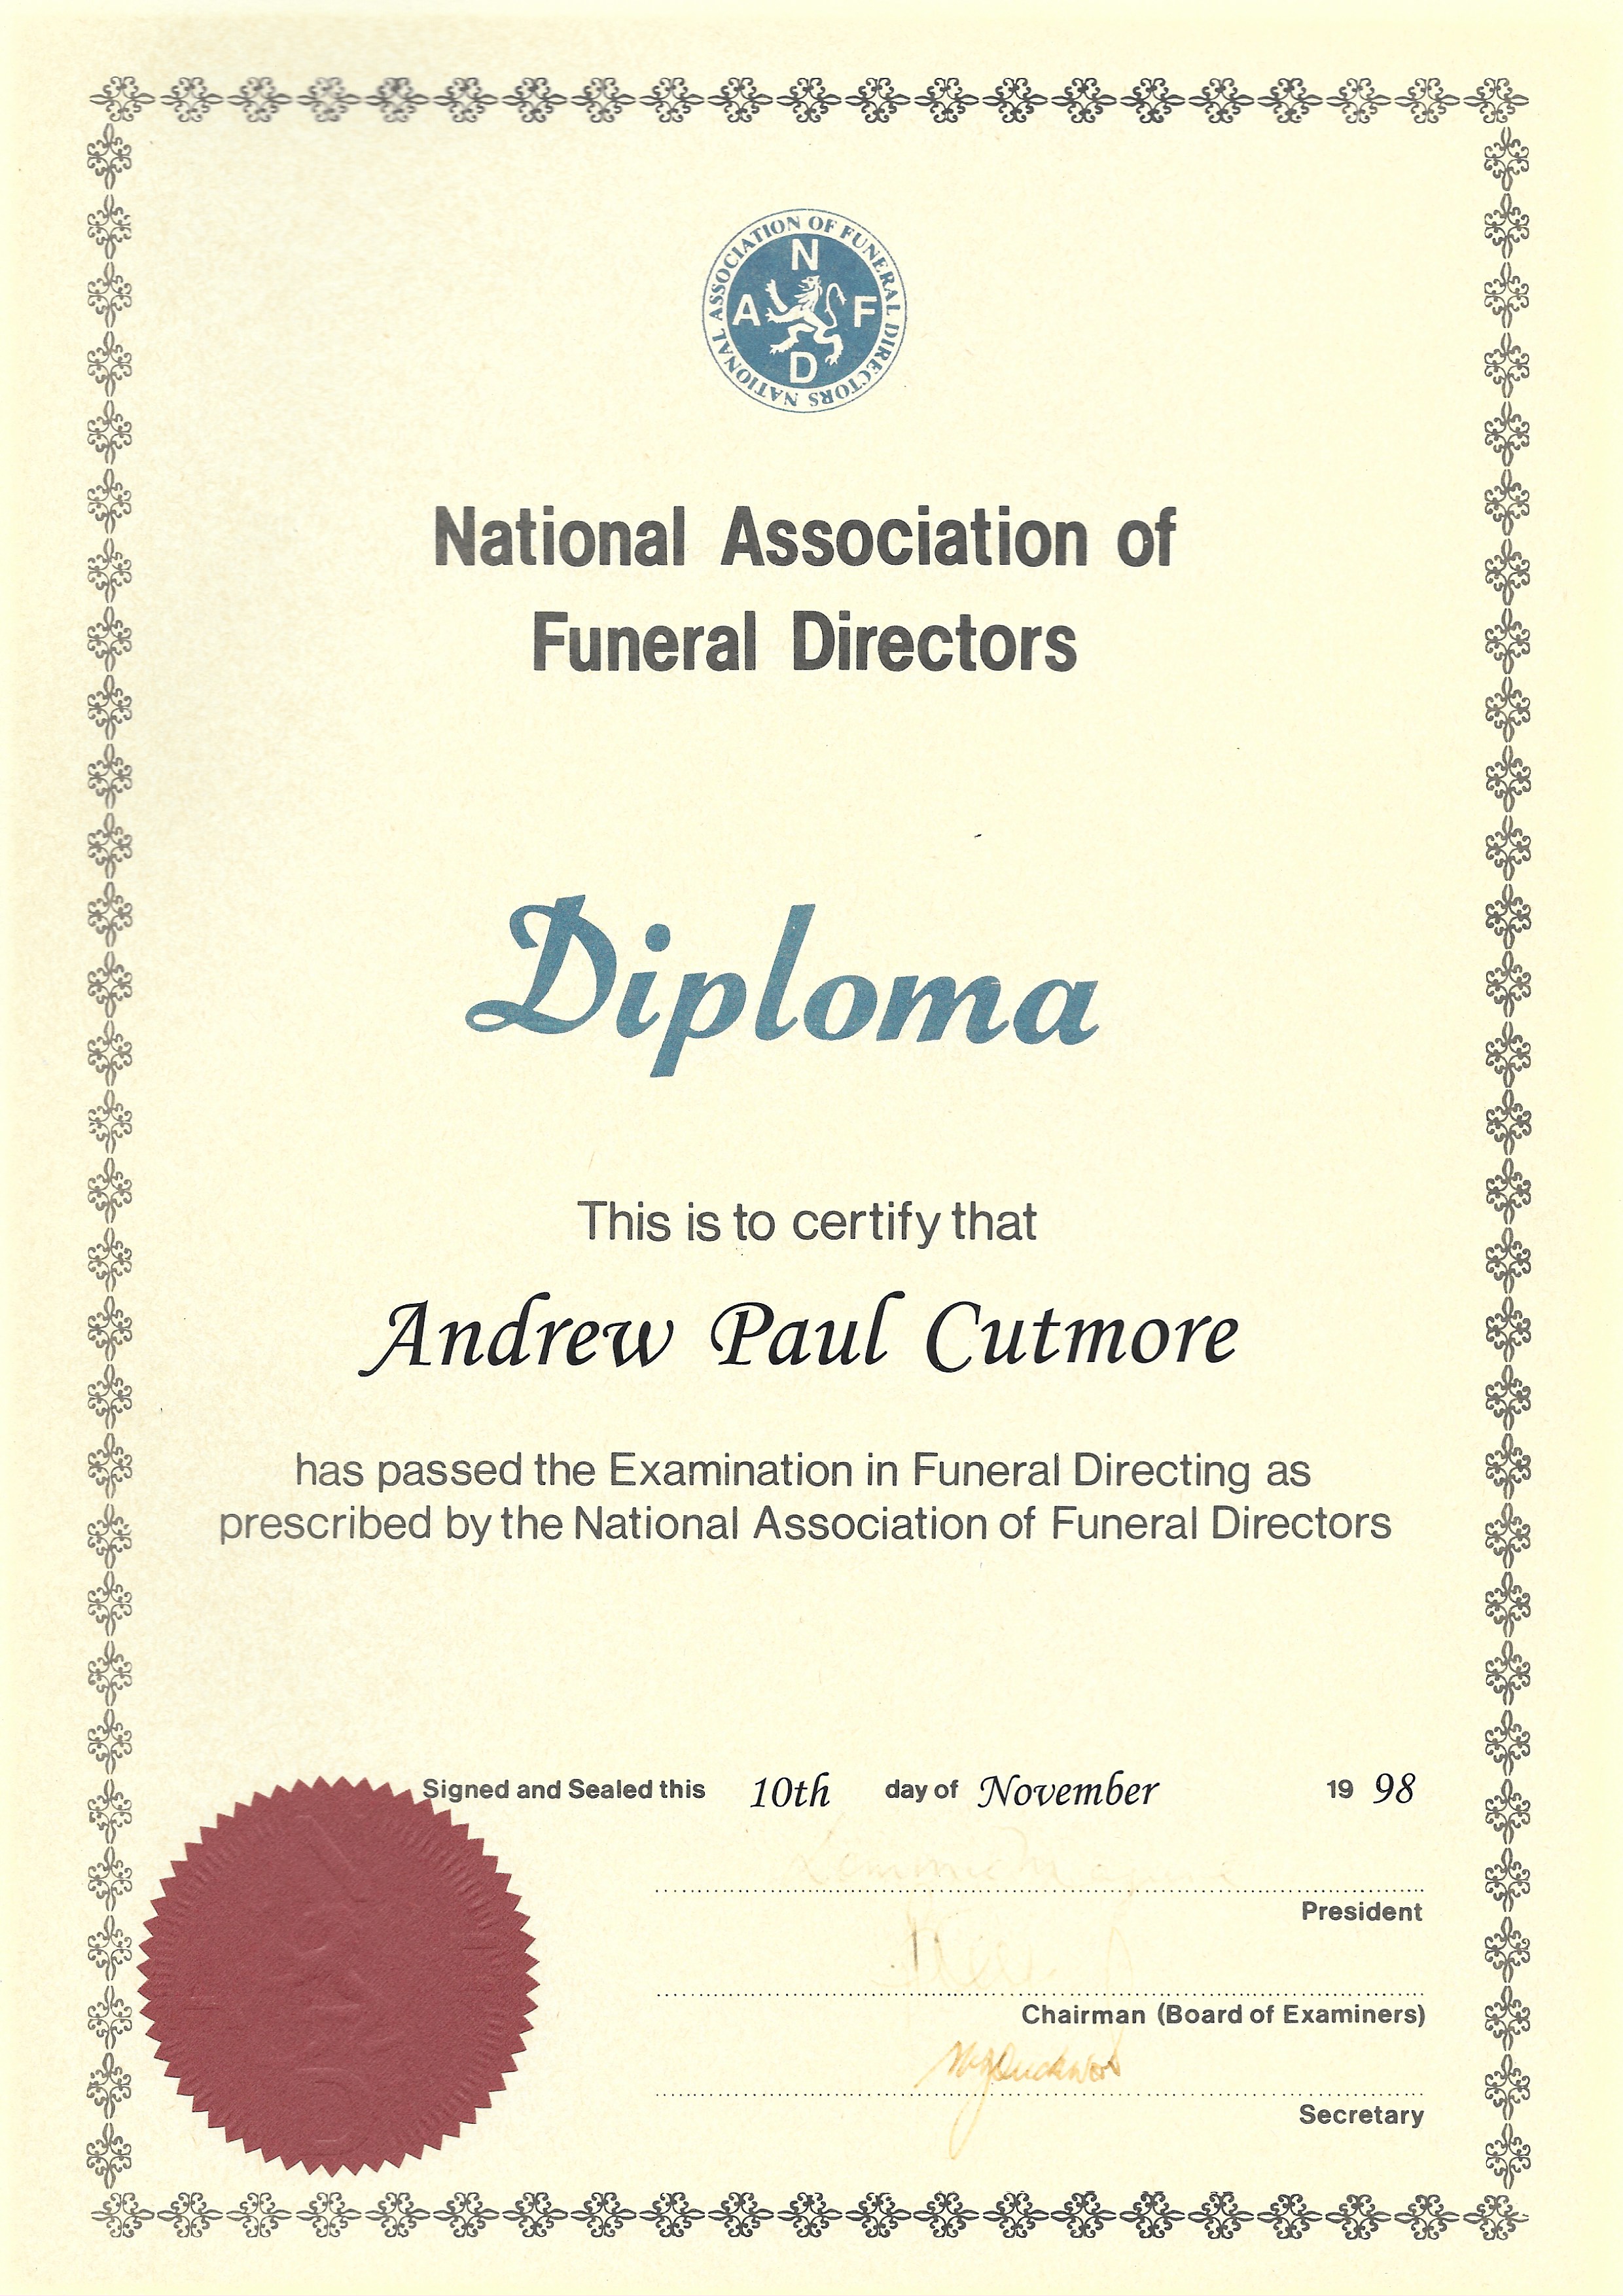 Andrews Diploma for Passing the Examination in Funeral Directing